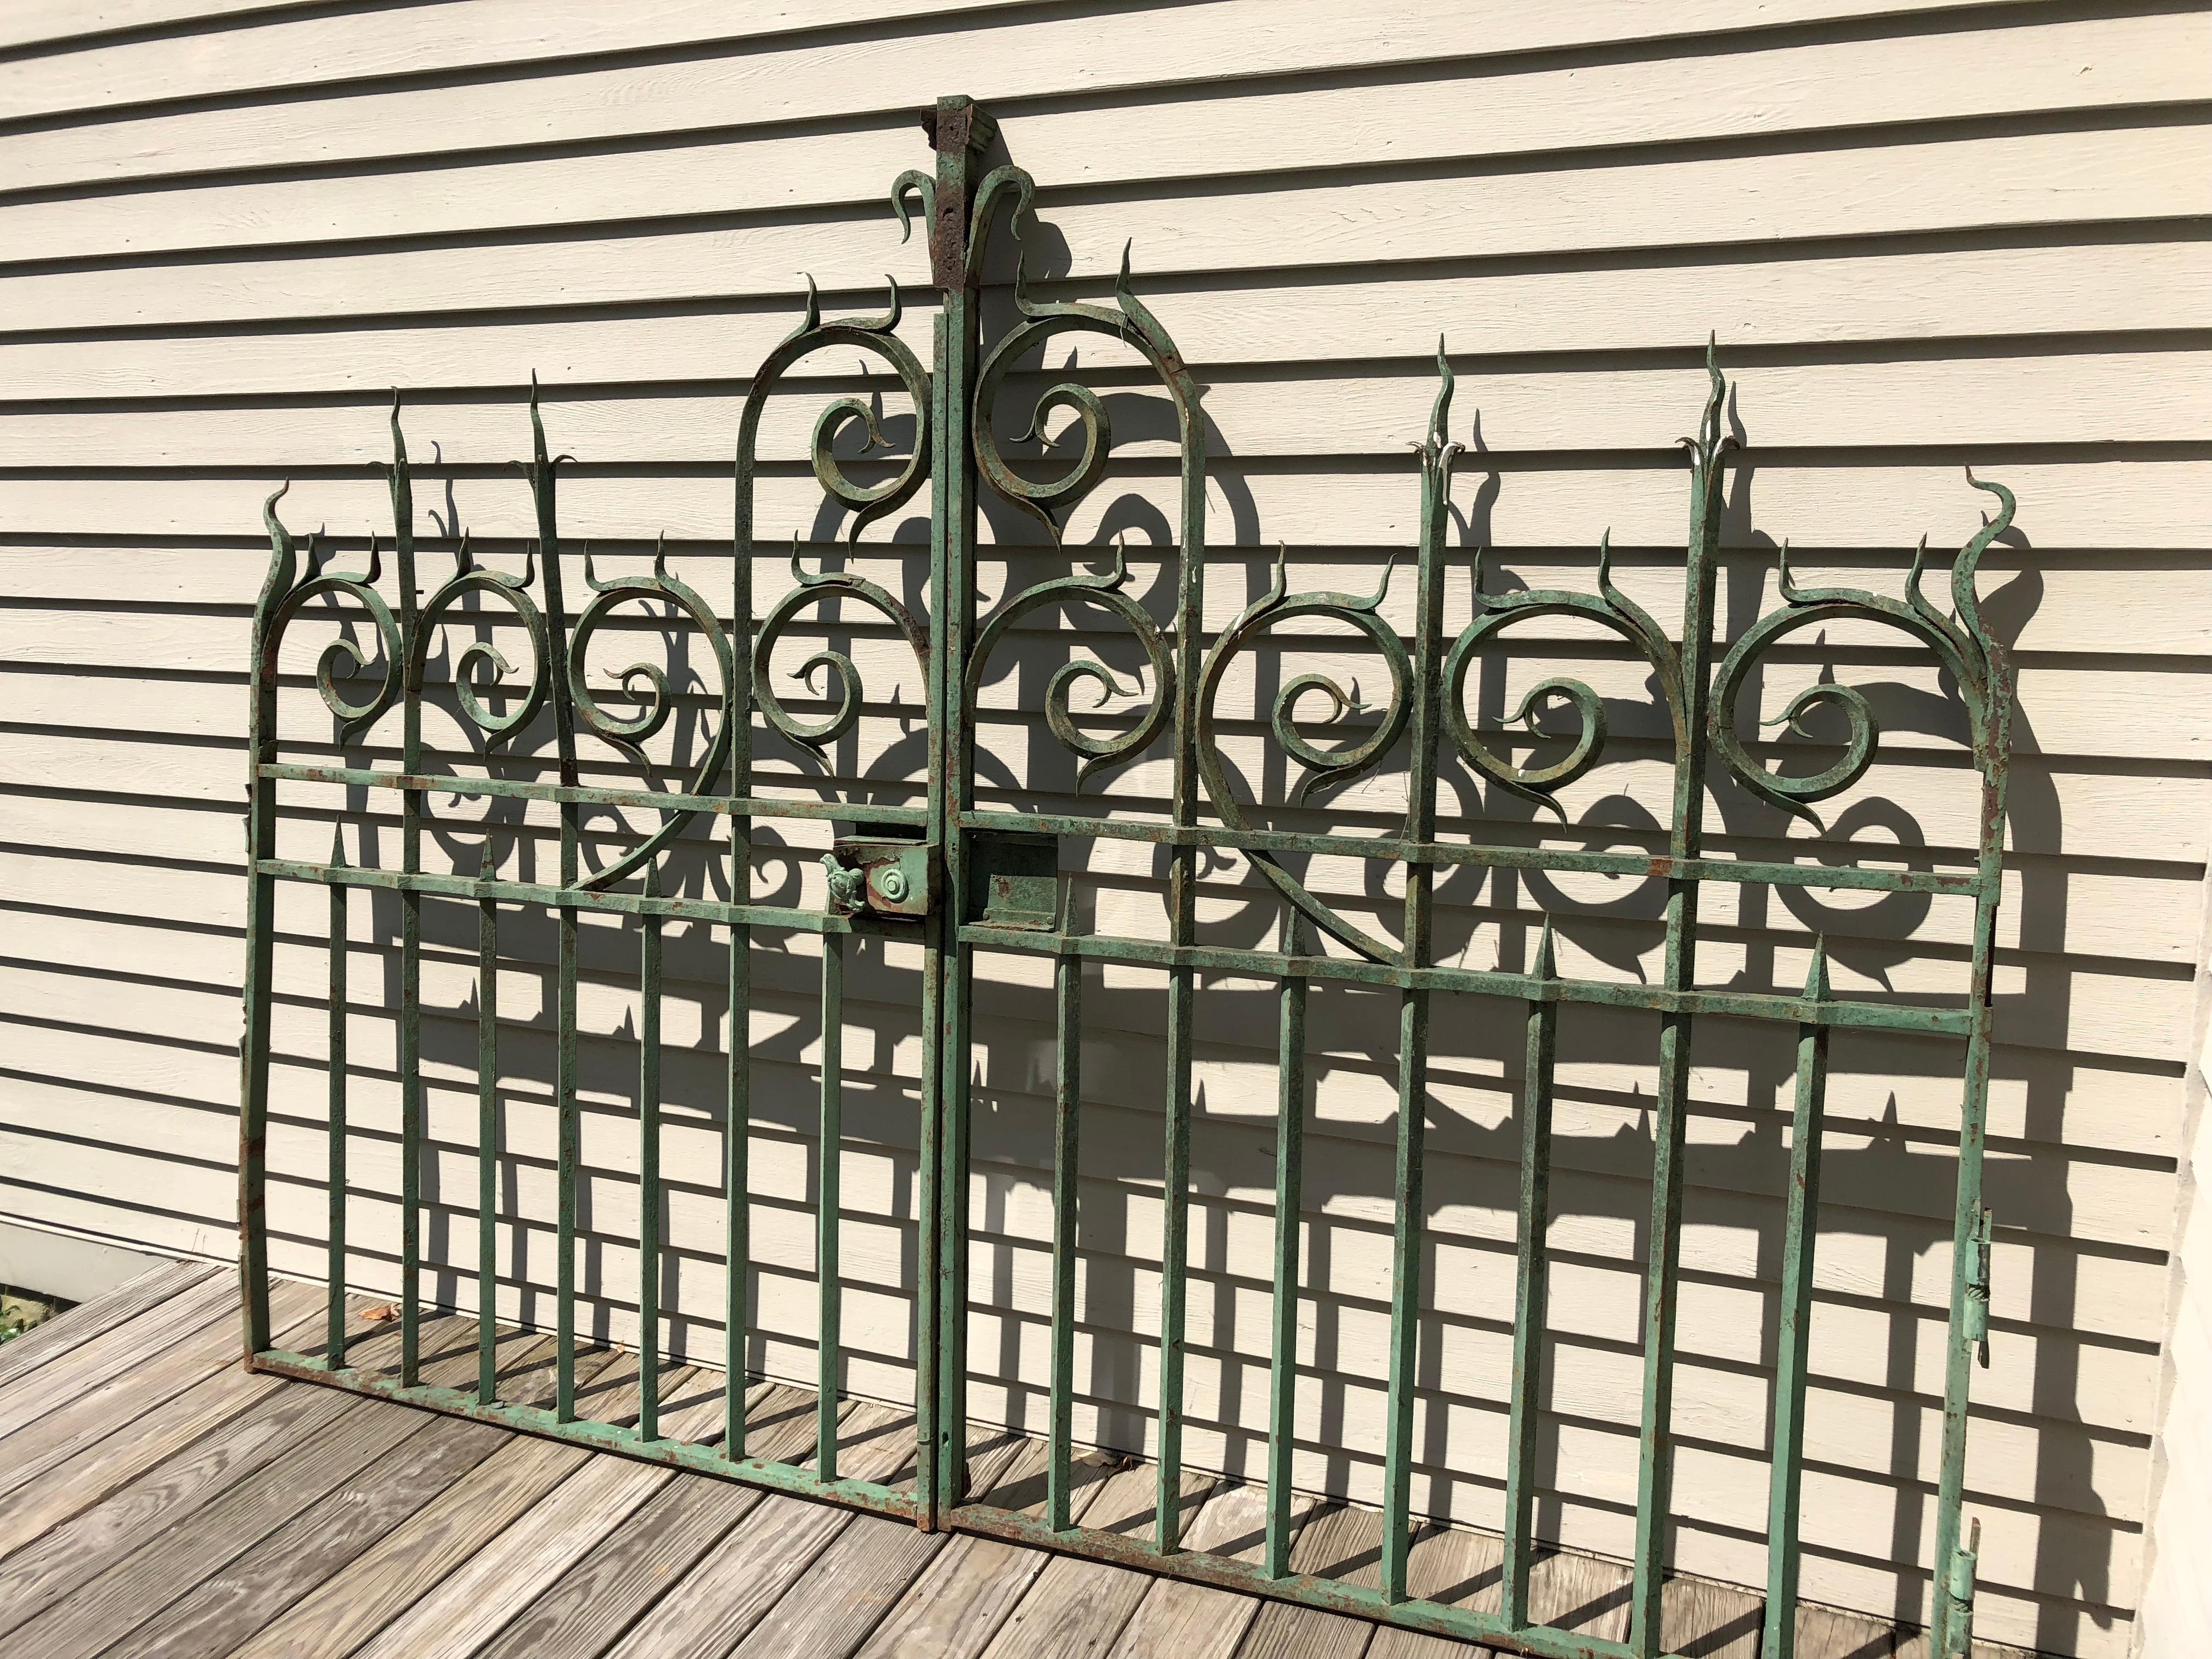 These gates are absolute stunners! All hand-wrought from heavy iron and sourced from a vineyard in Bordeaux, they feature their original green paint with mild surface rusting. Their spectacular detailing and craftsmanship is evident throughout and